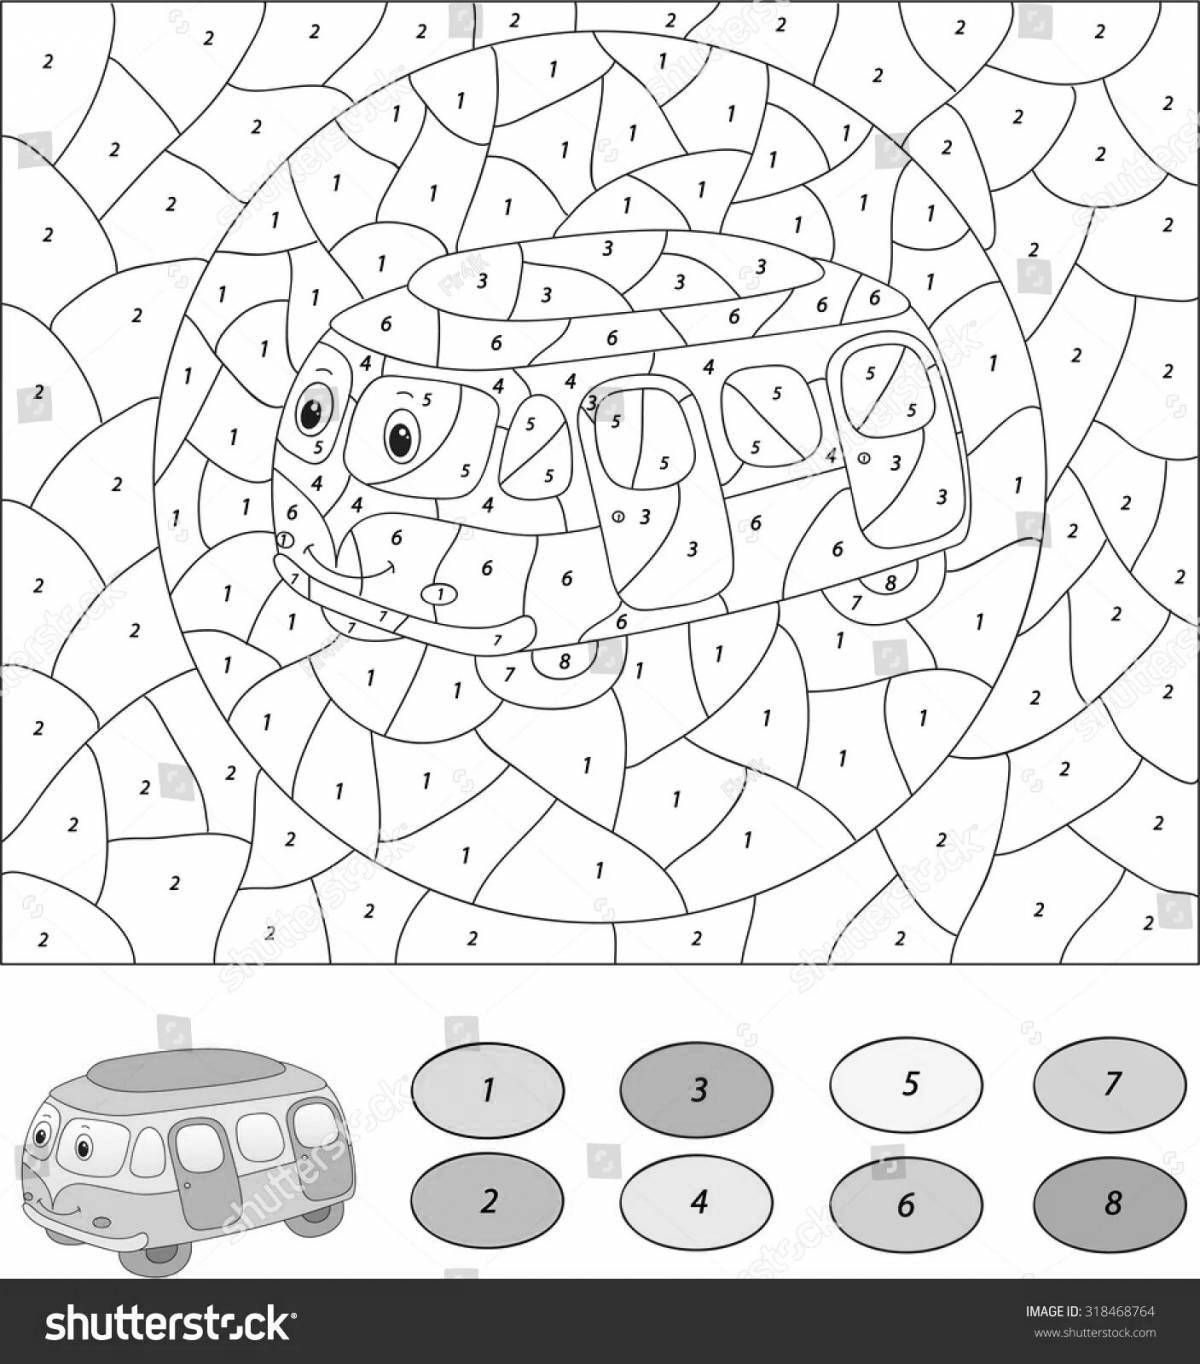 Wonderful car number coloring book for kids 5-6 years old